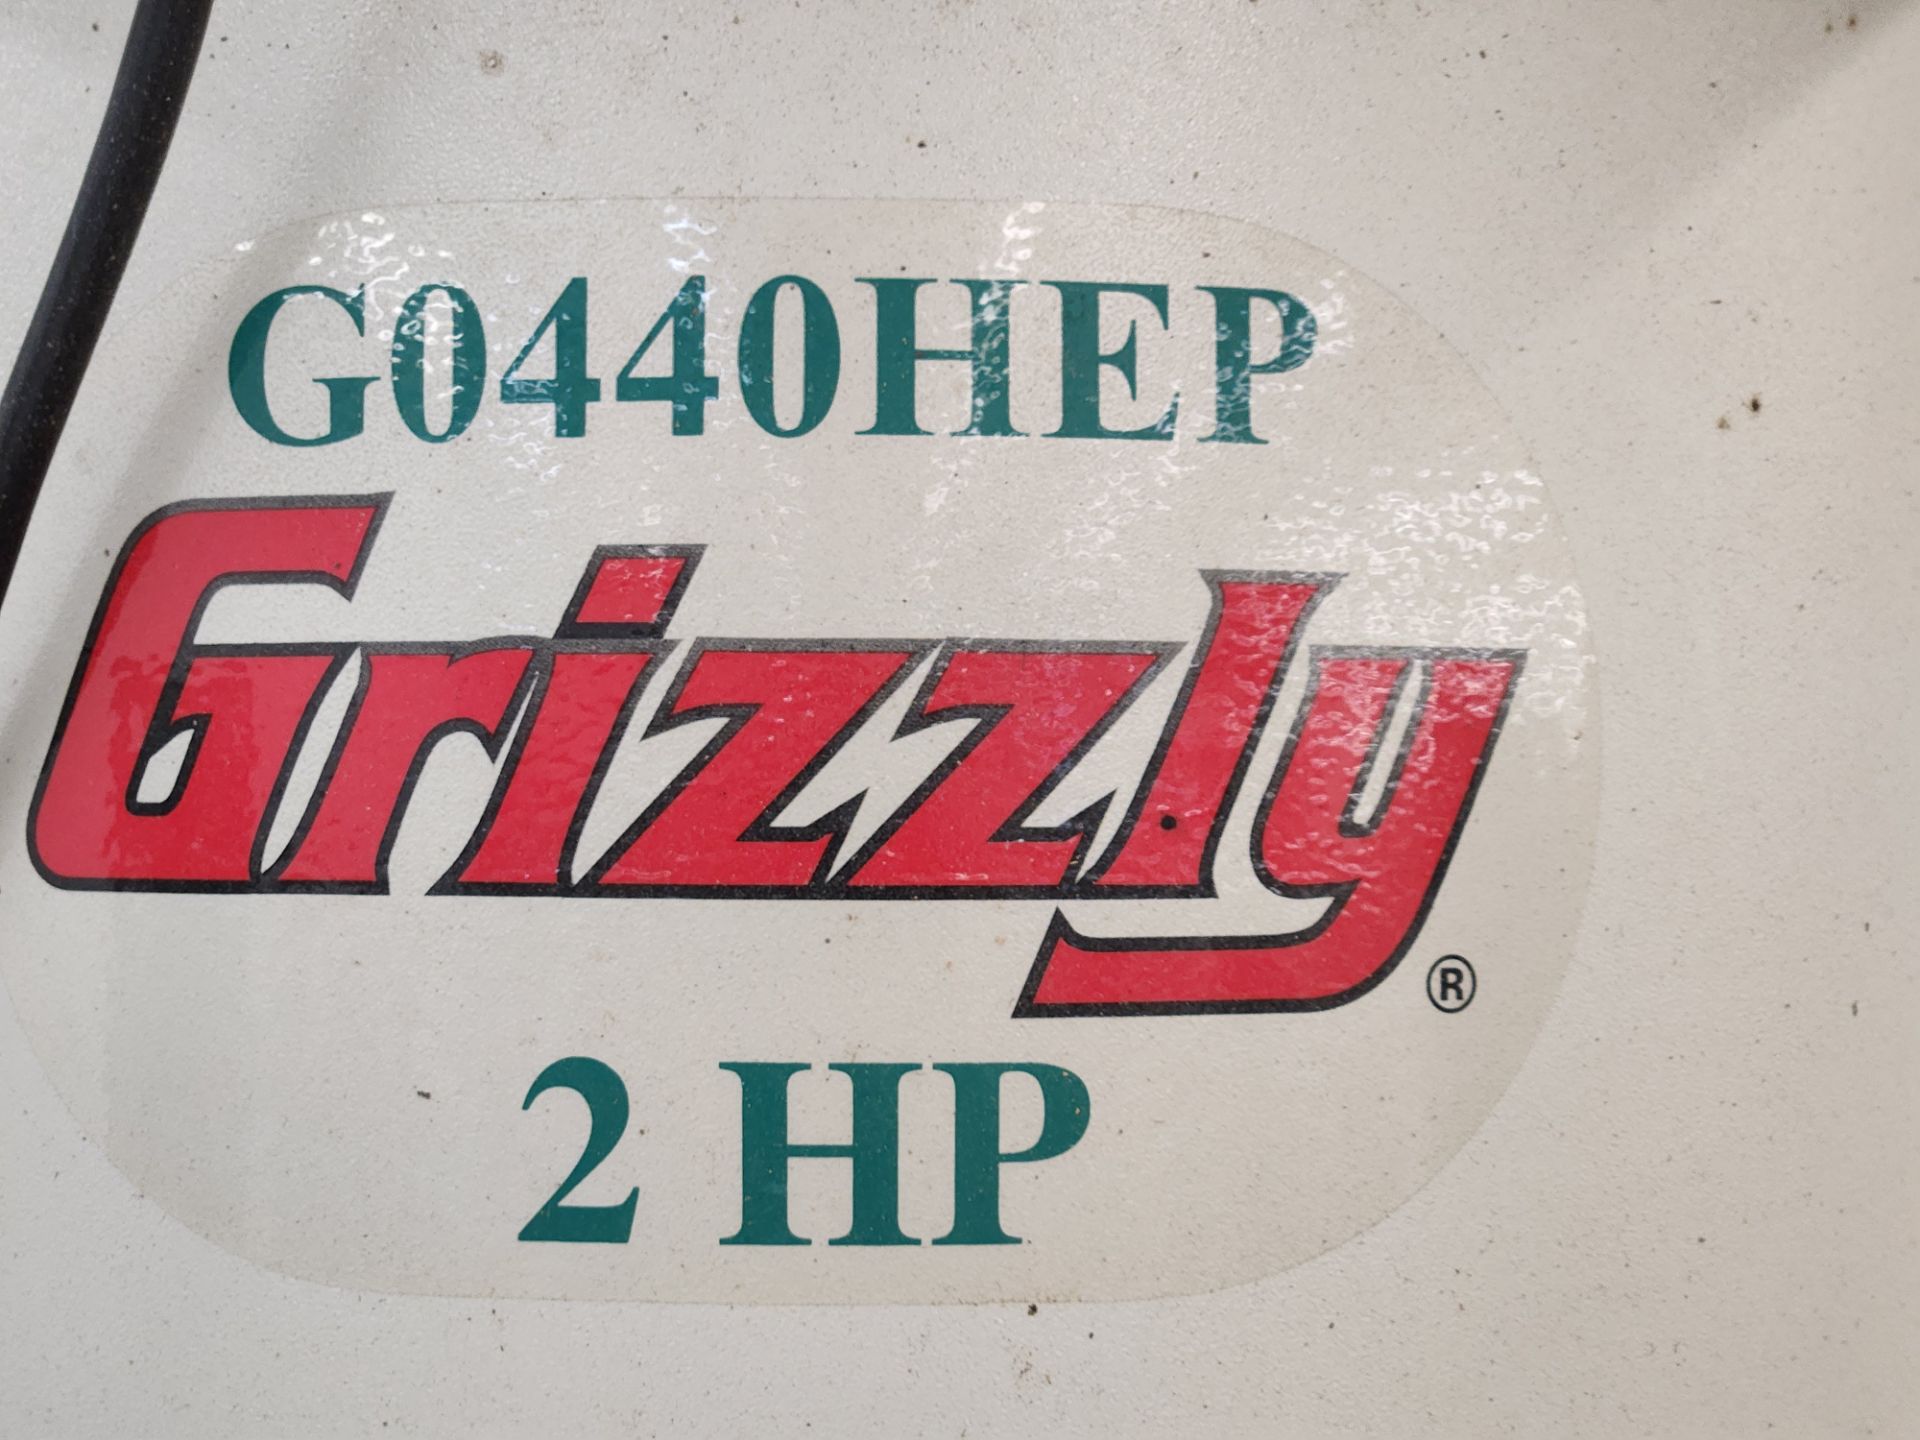 Grizzly Dual Filtration HEPA Cyclone Dust Collector - Image 4 of 7